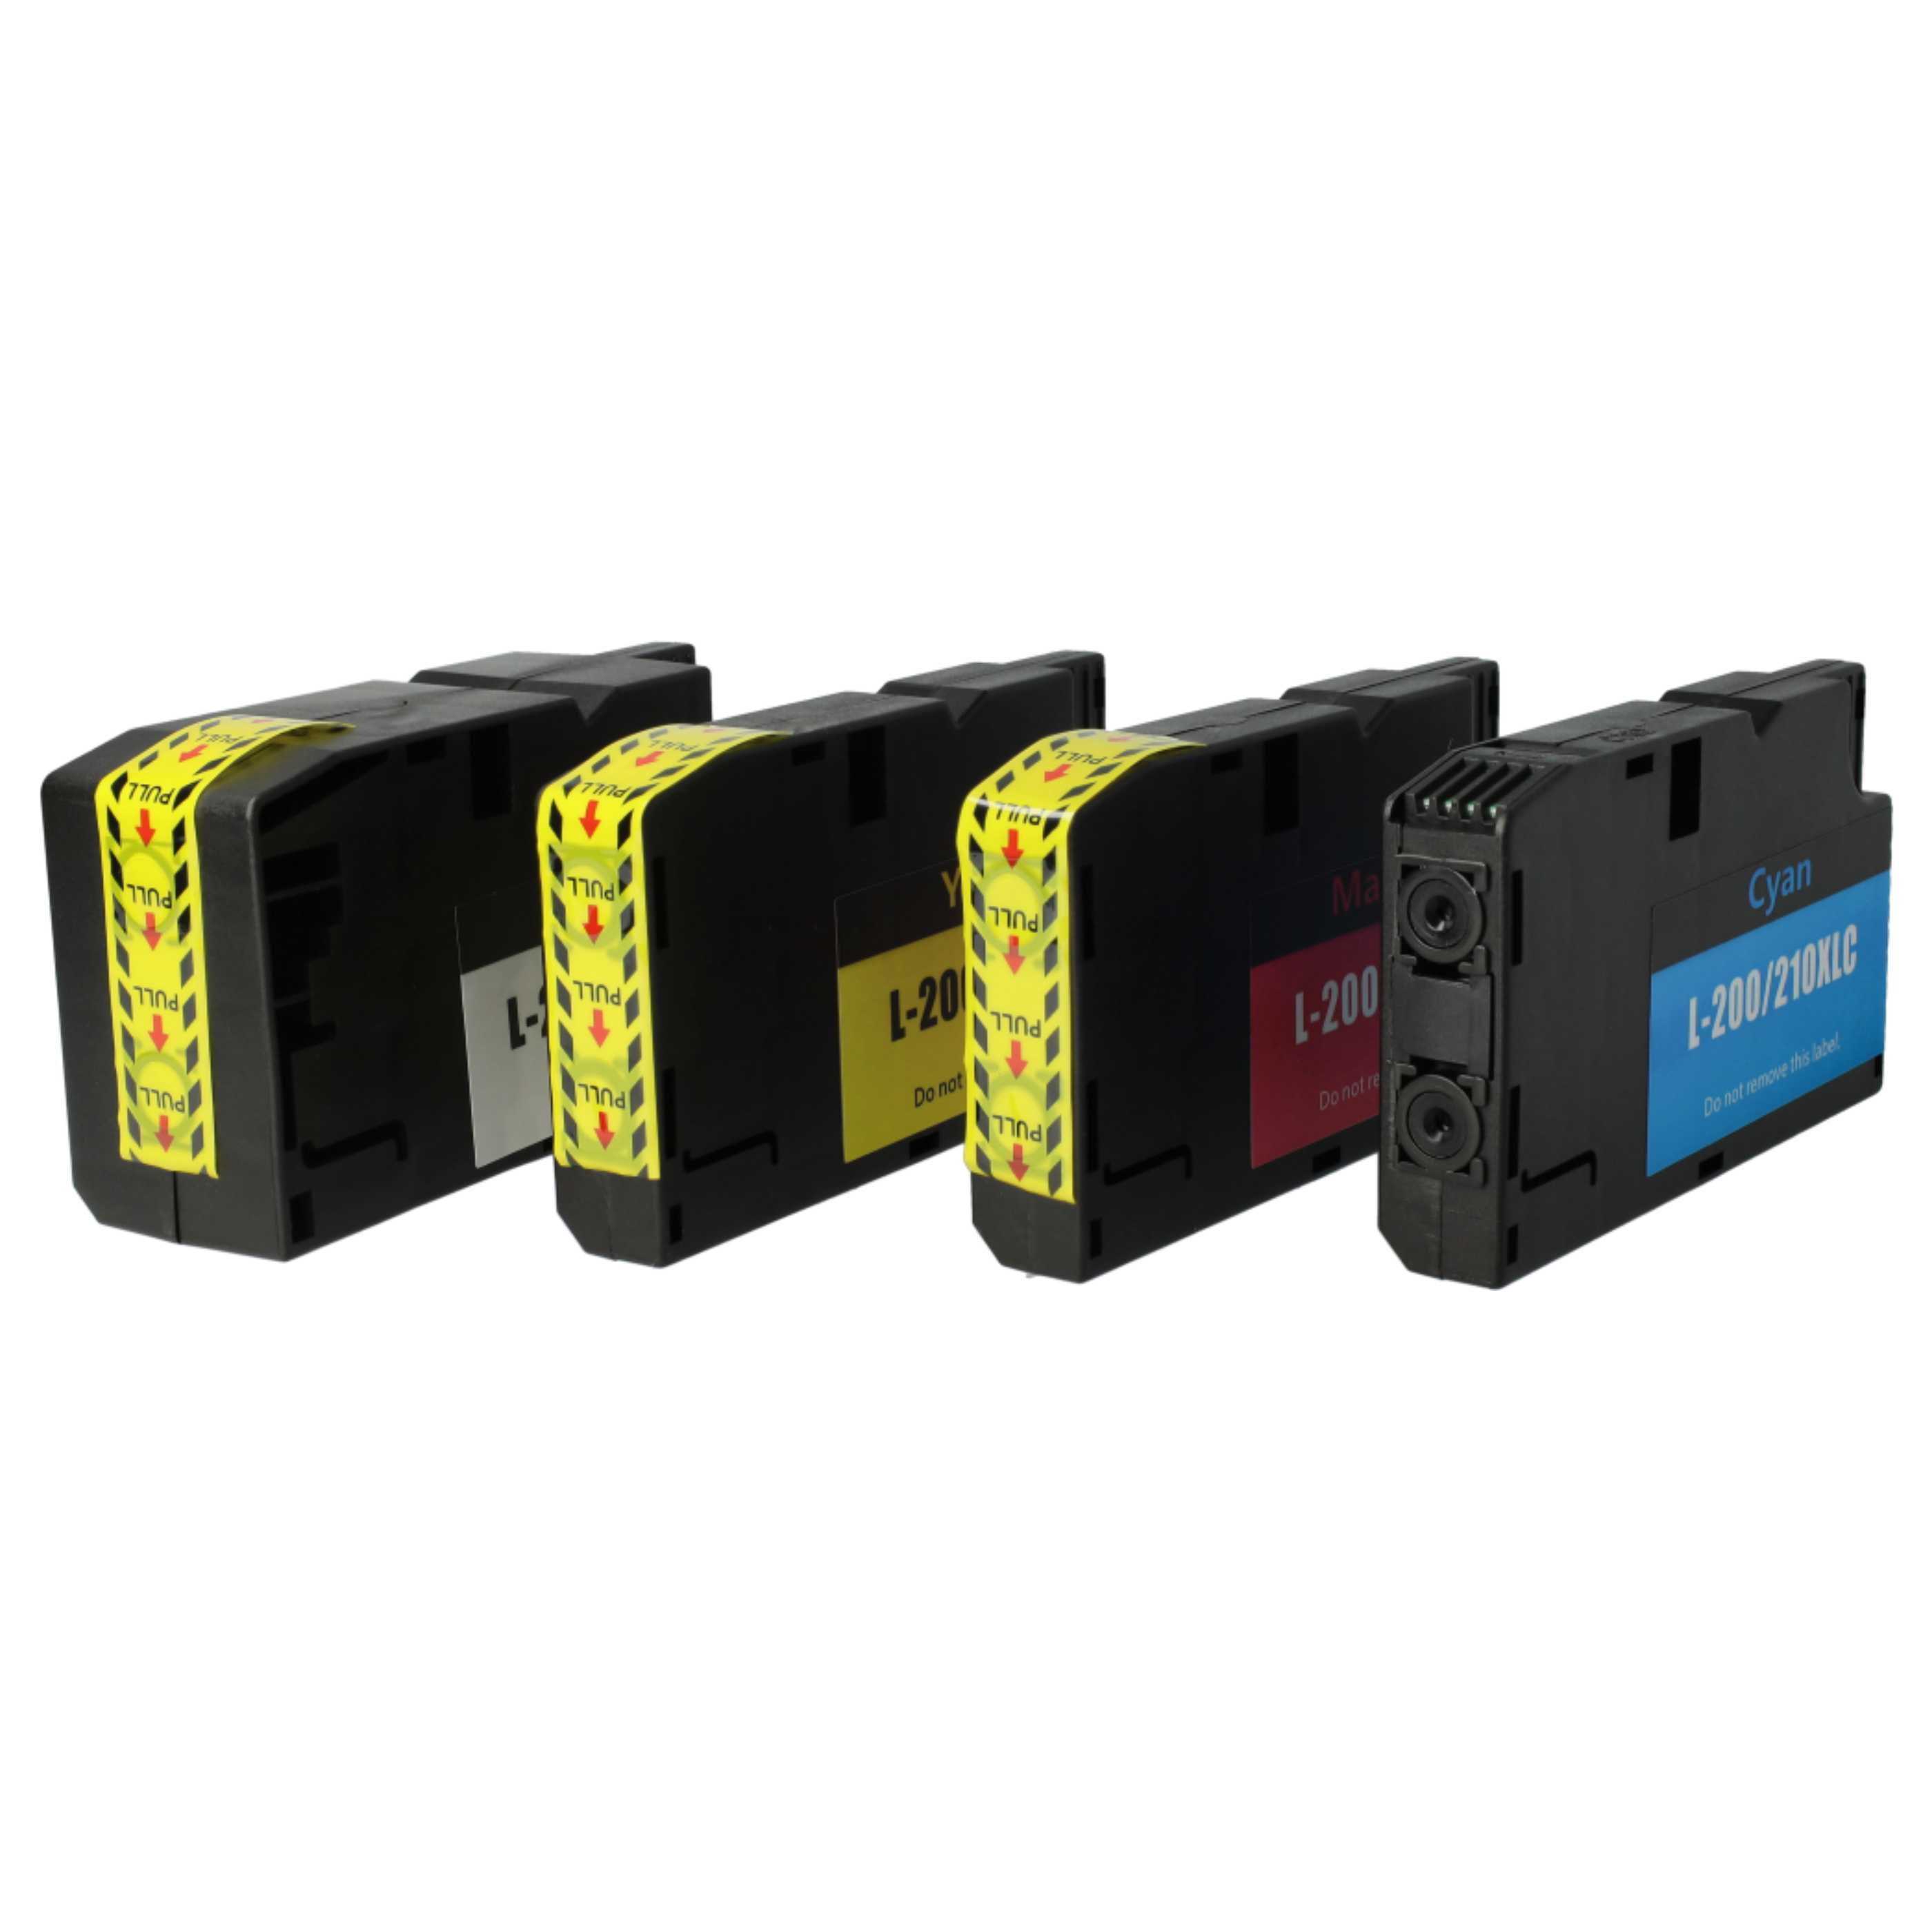 4x Ink Cartridges replaces Lexmark 200XL for Pro 4000 Printer - B/C/M/Y